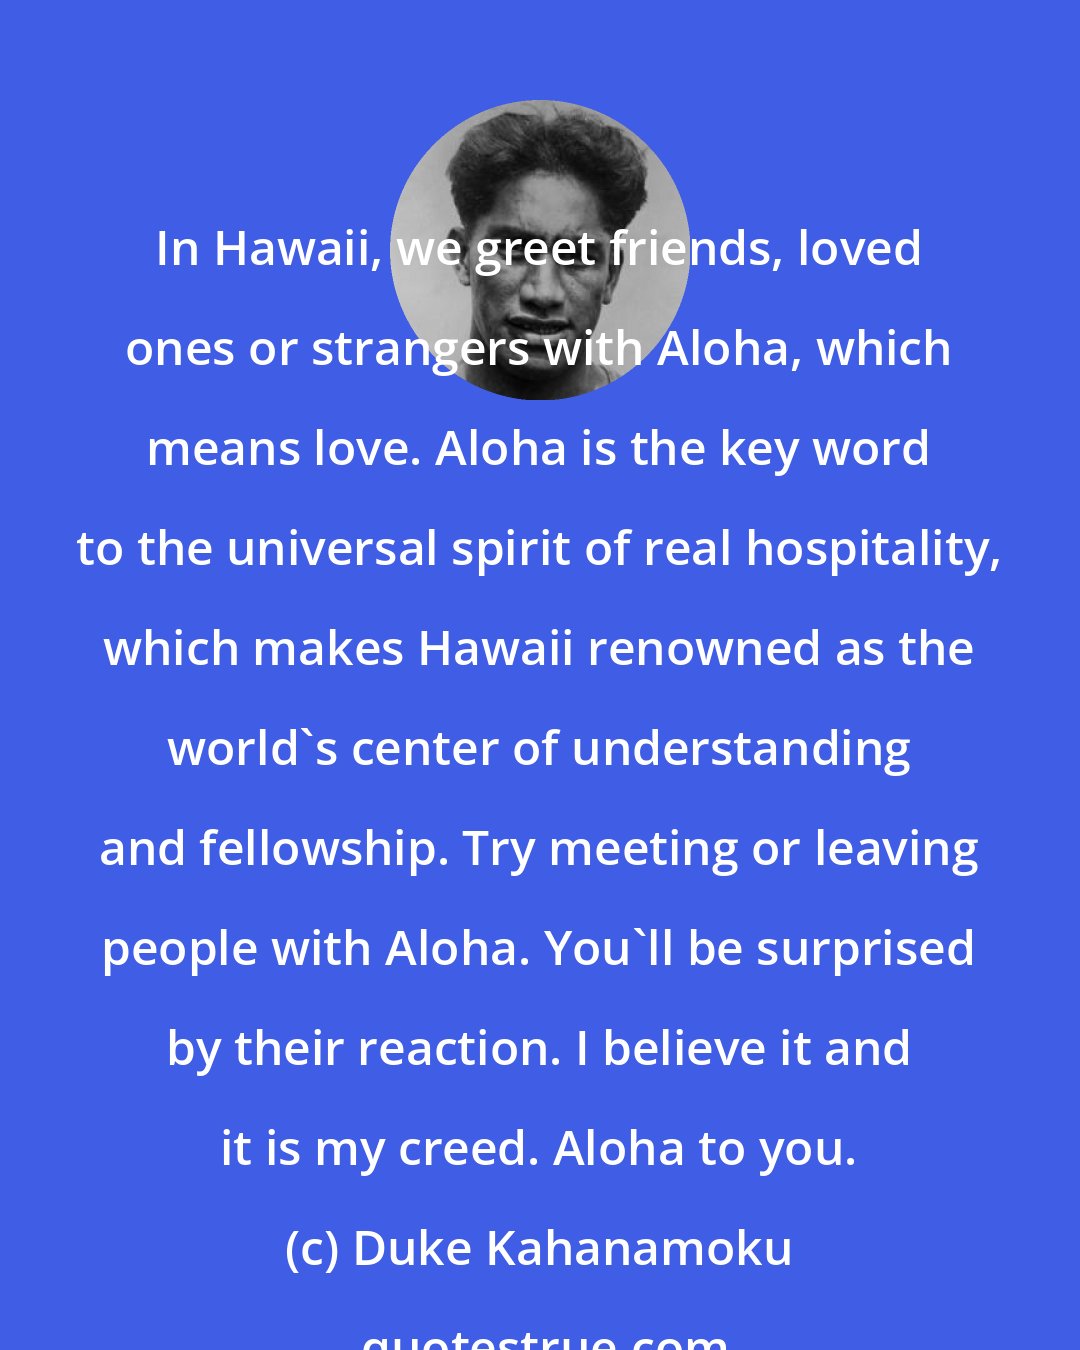 Duke Kahanamoku: In Hawaii, we greet friends, loved ones or strangers with Aloha, which means love. Aloha is the key word to the universal spirit of real hospitality, which makes Hawaii renowned as the world's center of understanding and fellowship. Try meeting or leaving people with Aloha. You'll be surprised by their reaction. I believe it and it is my creed. Aloha to you.